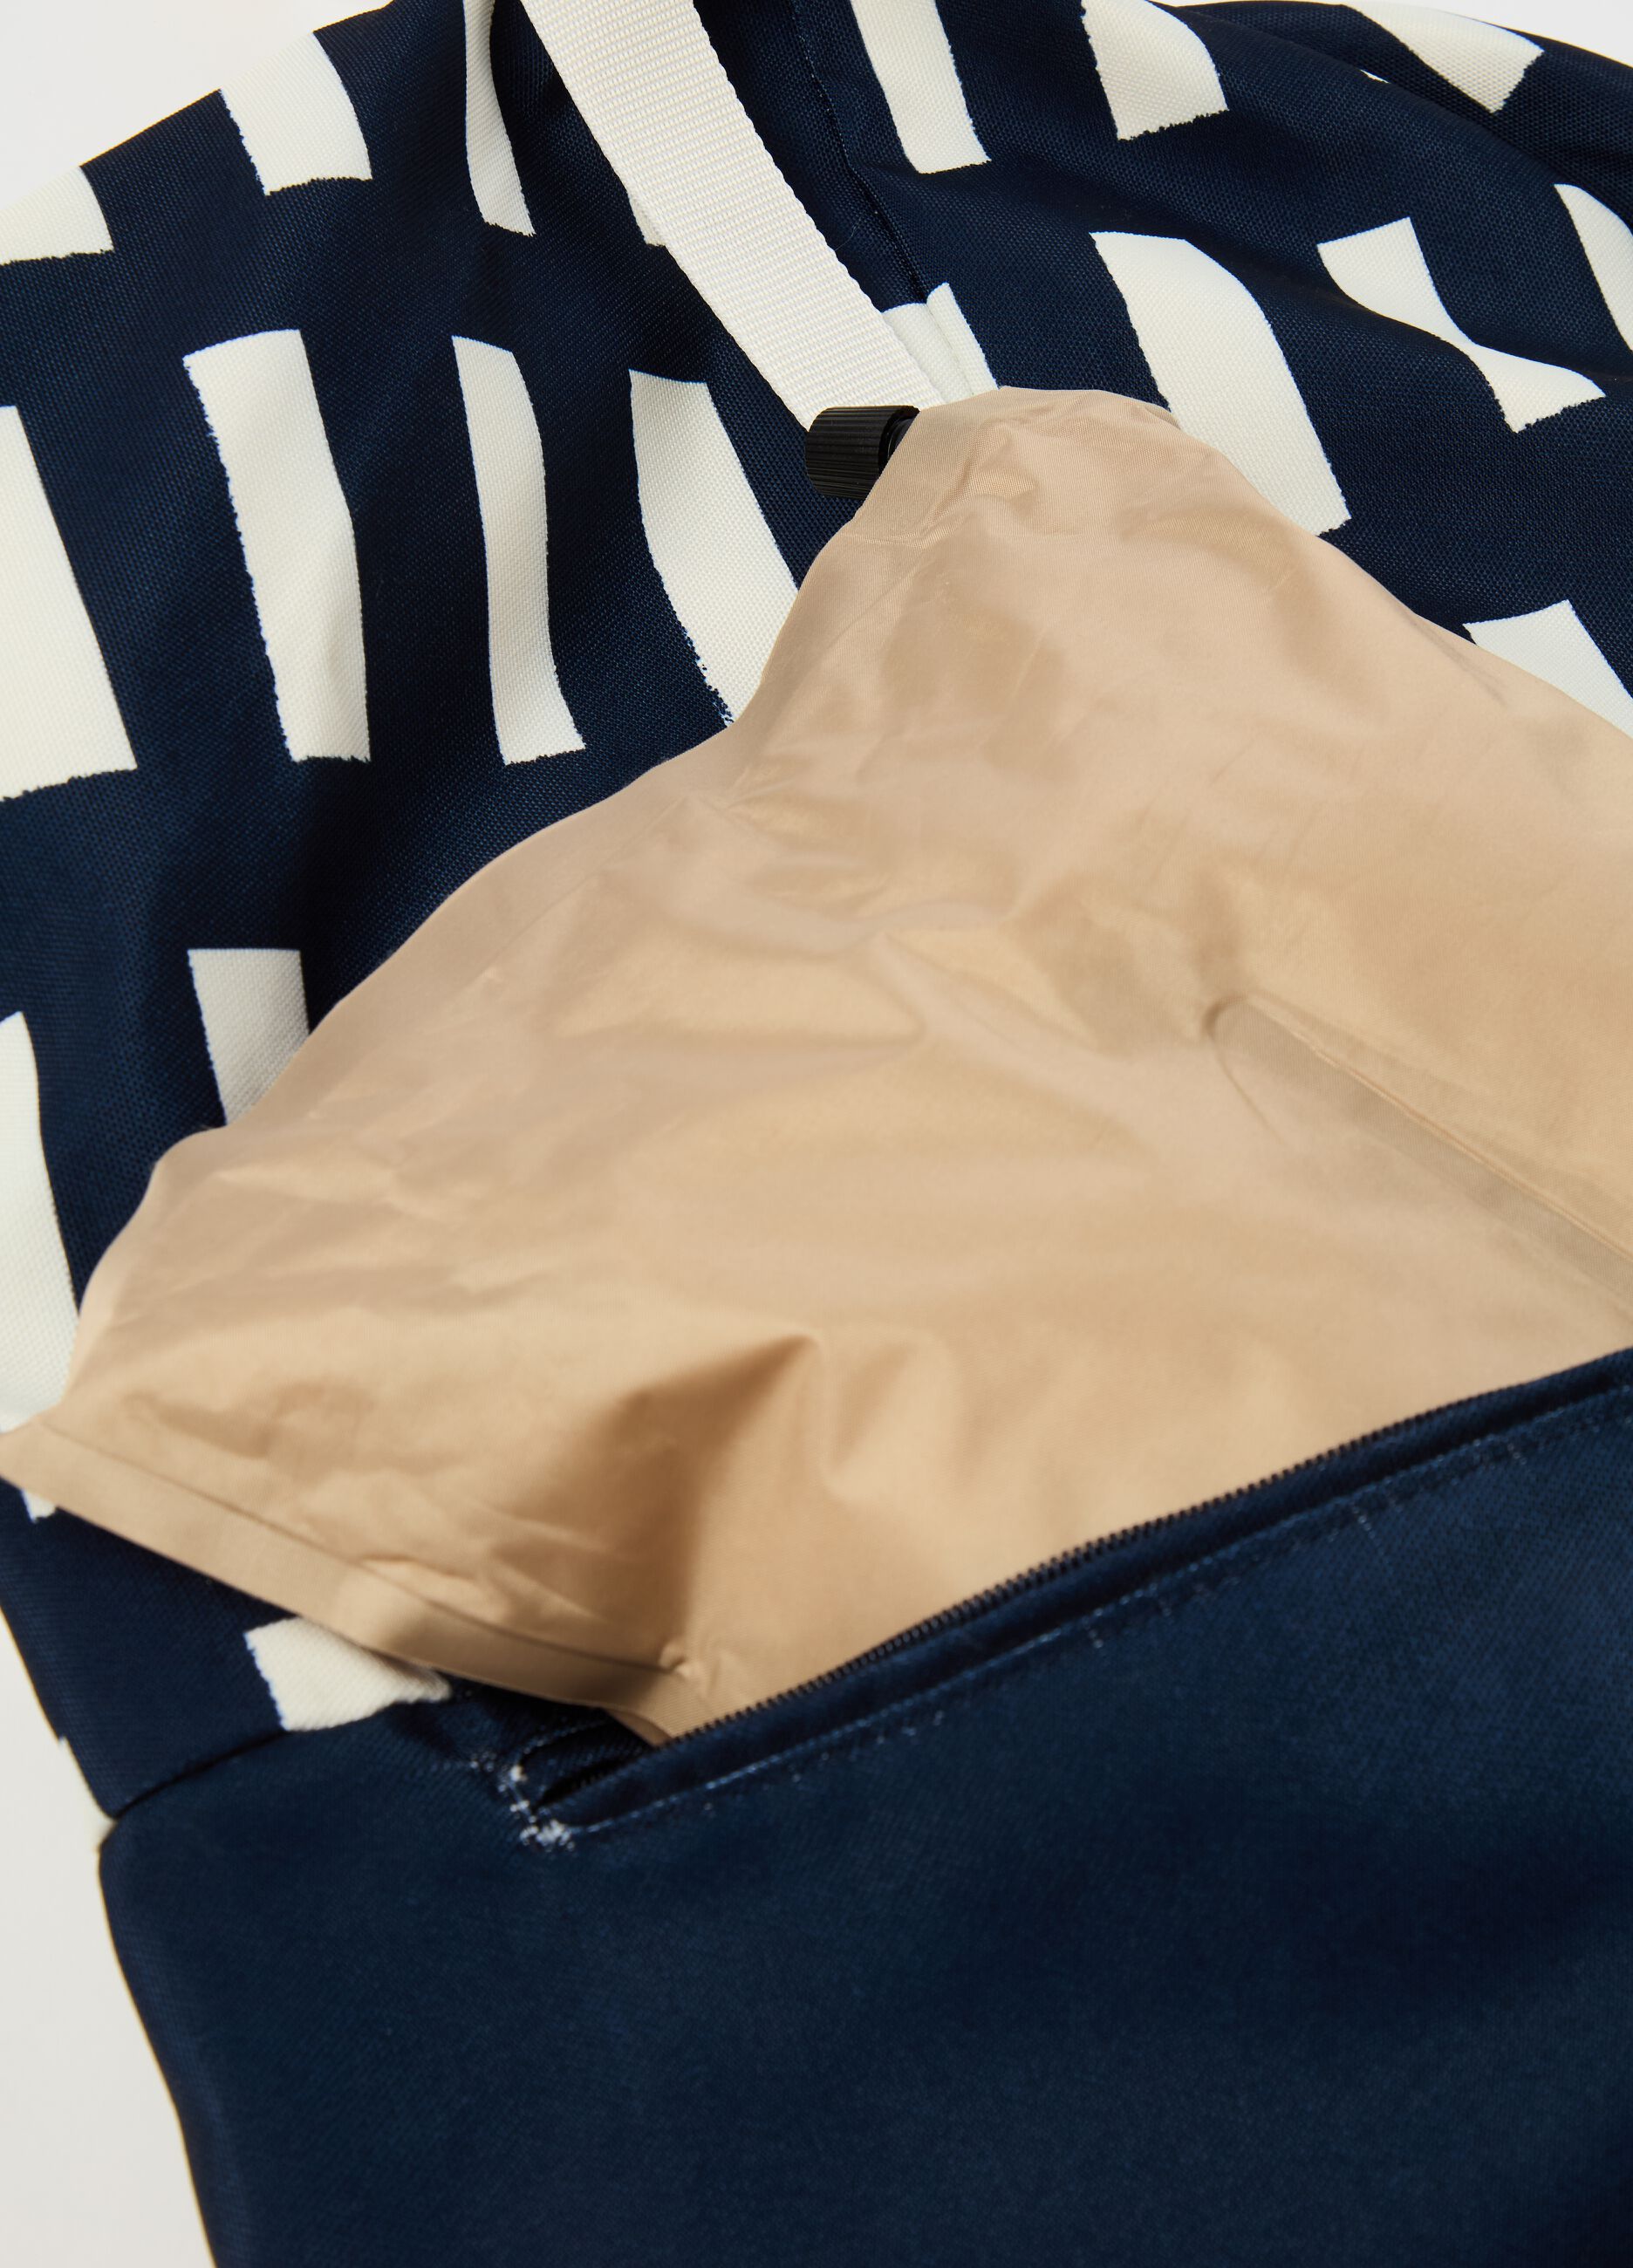 Pillow bag in tela con stampa